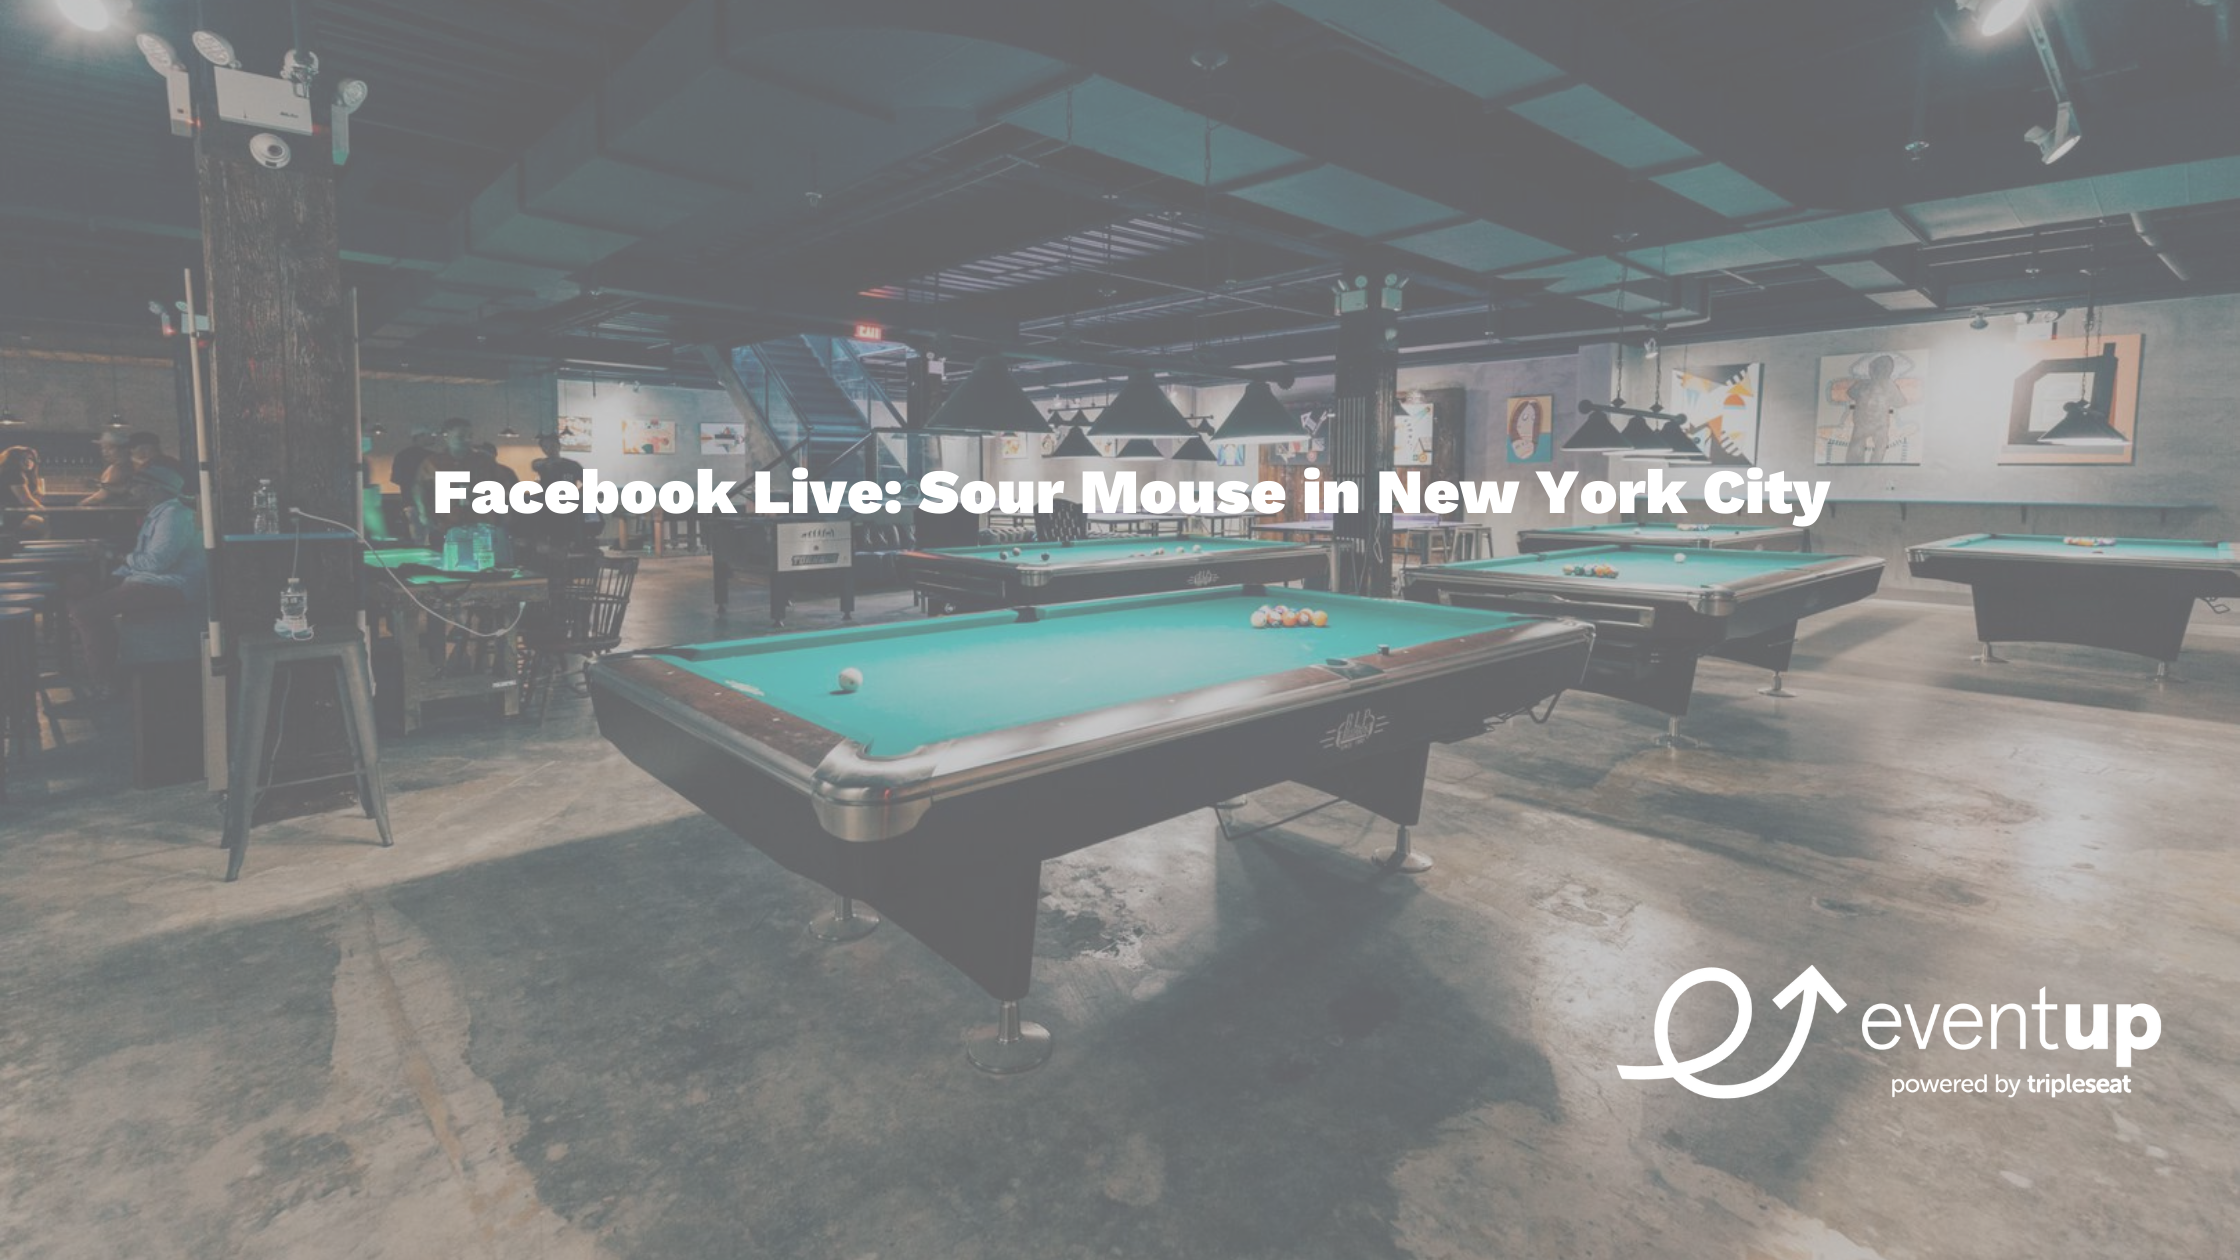 Facebook Live: Sour Mouse in New York City